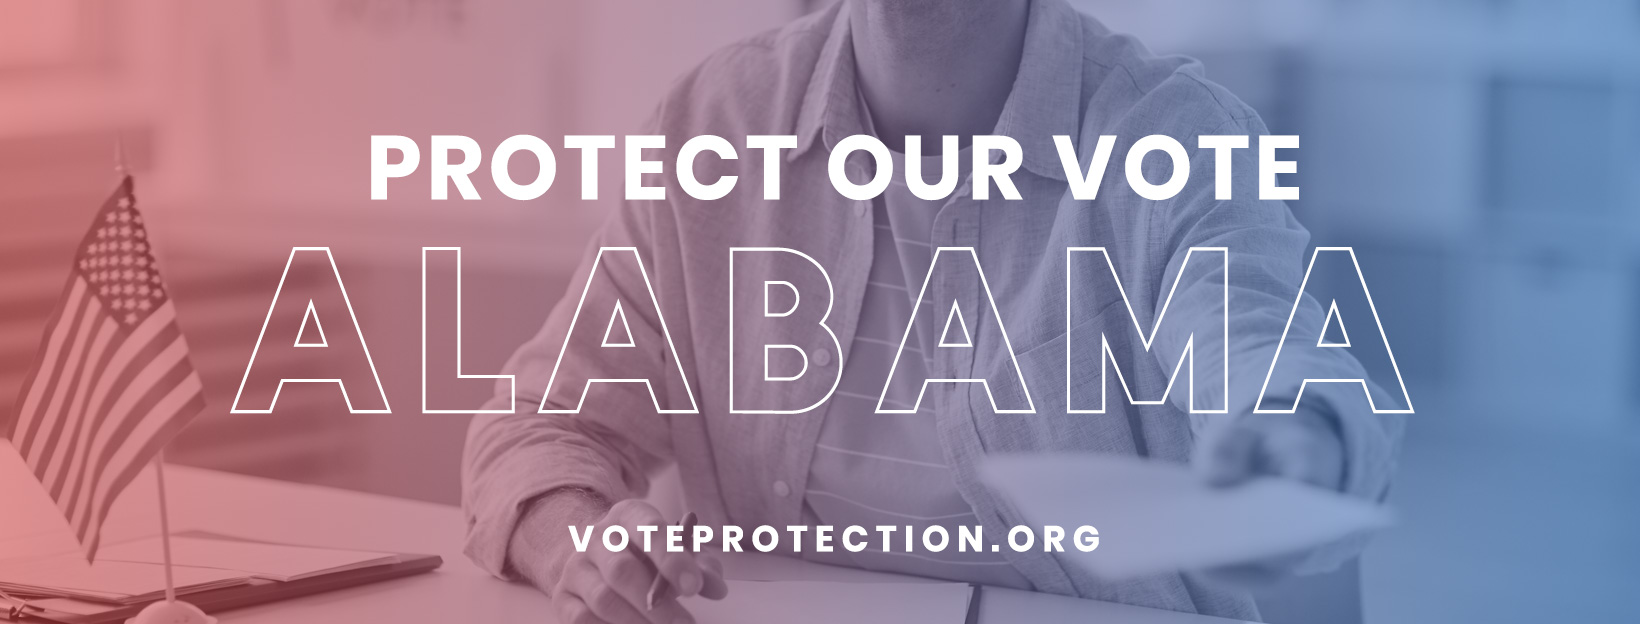 The Alabama Election Protection Network provides Alabamians with comprehensive information and assistance at all stages of voting.